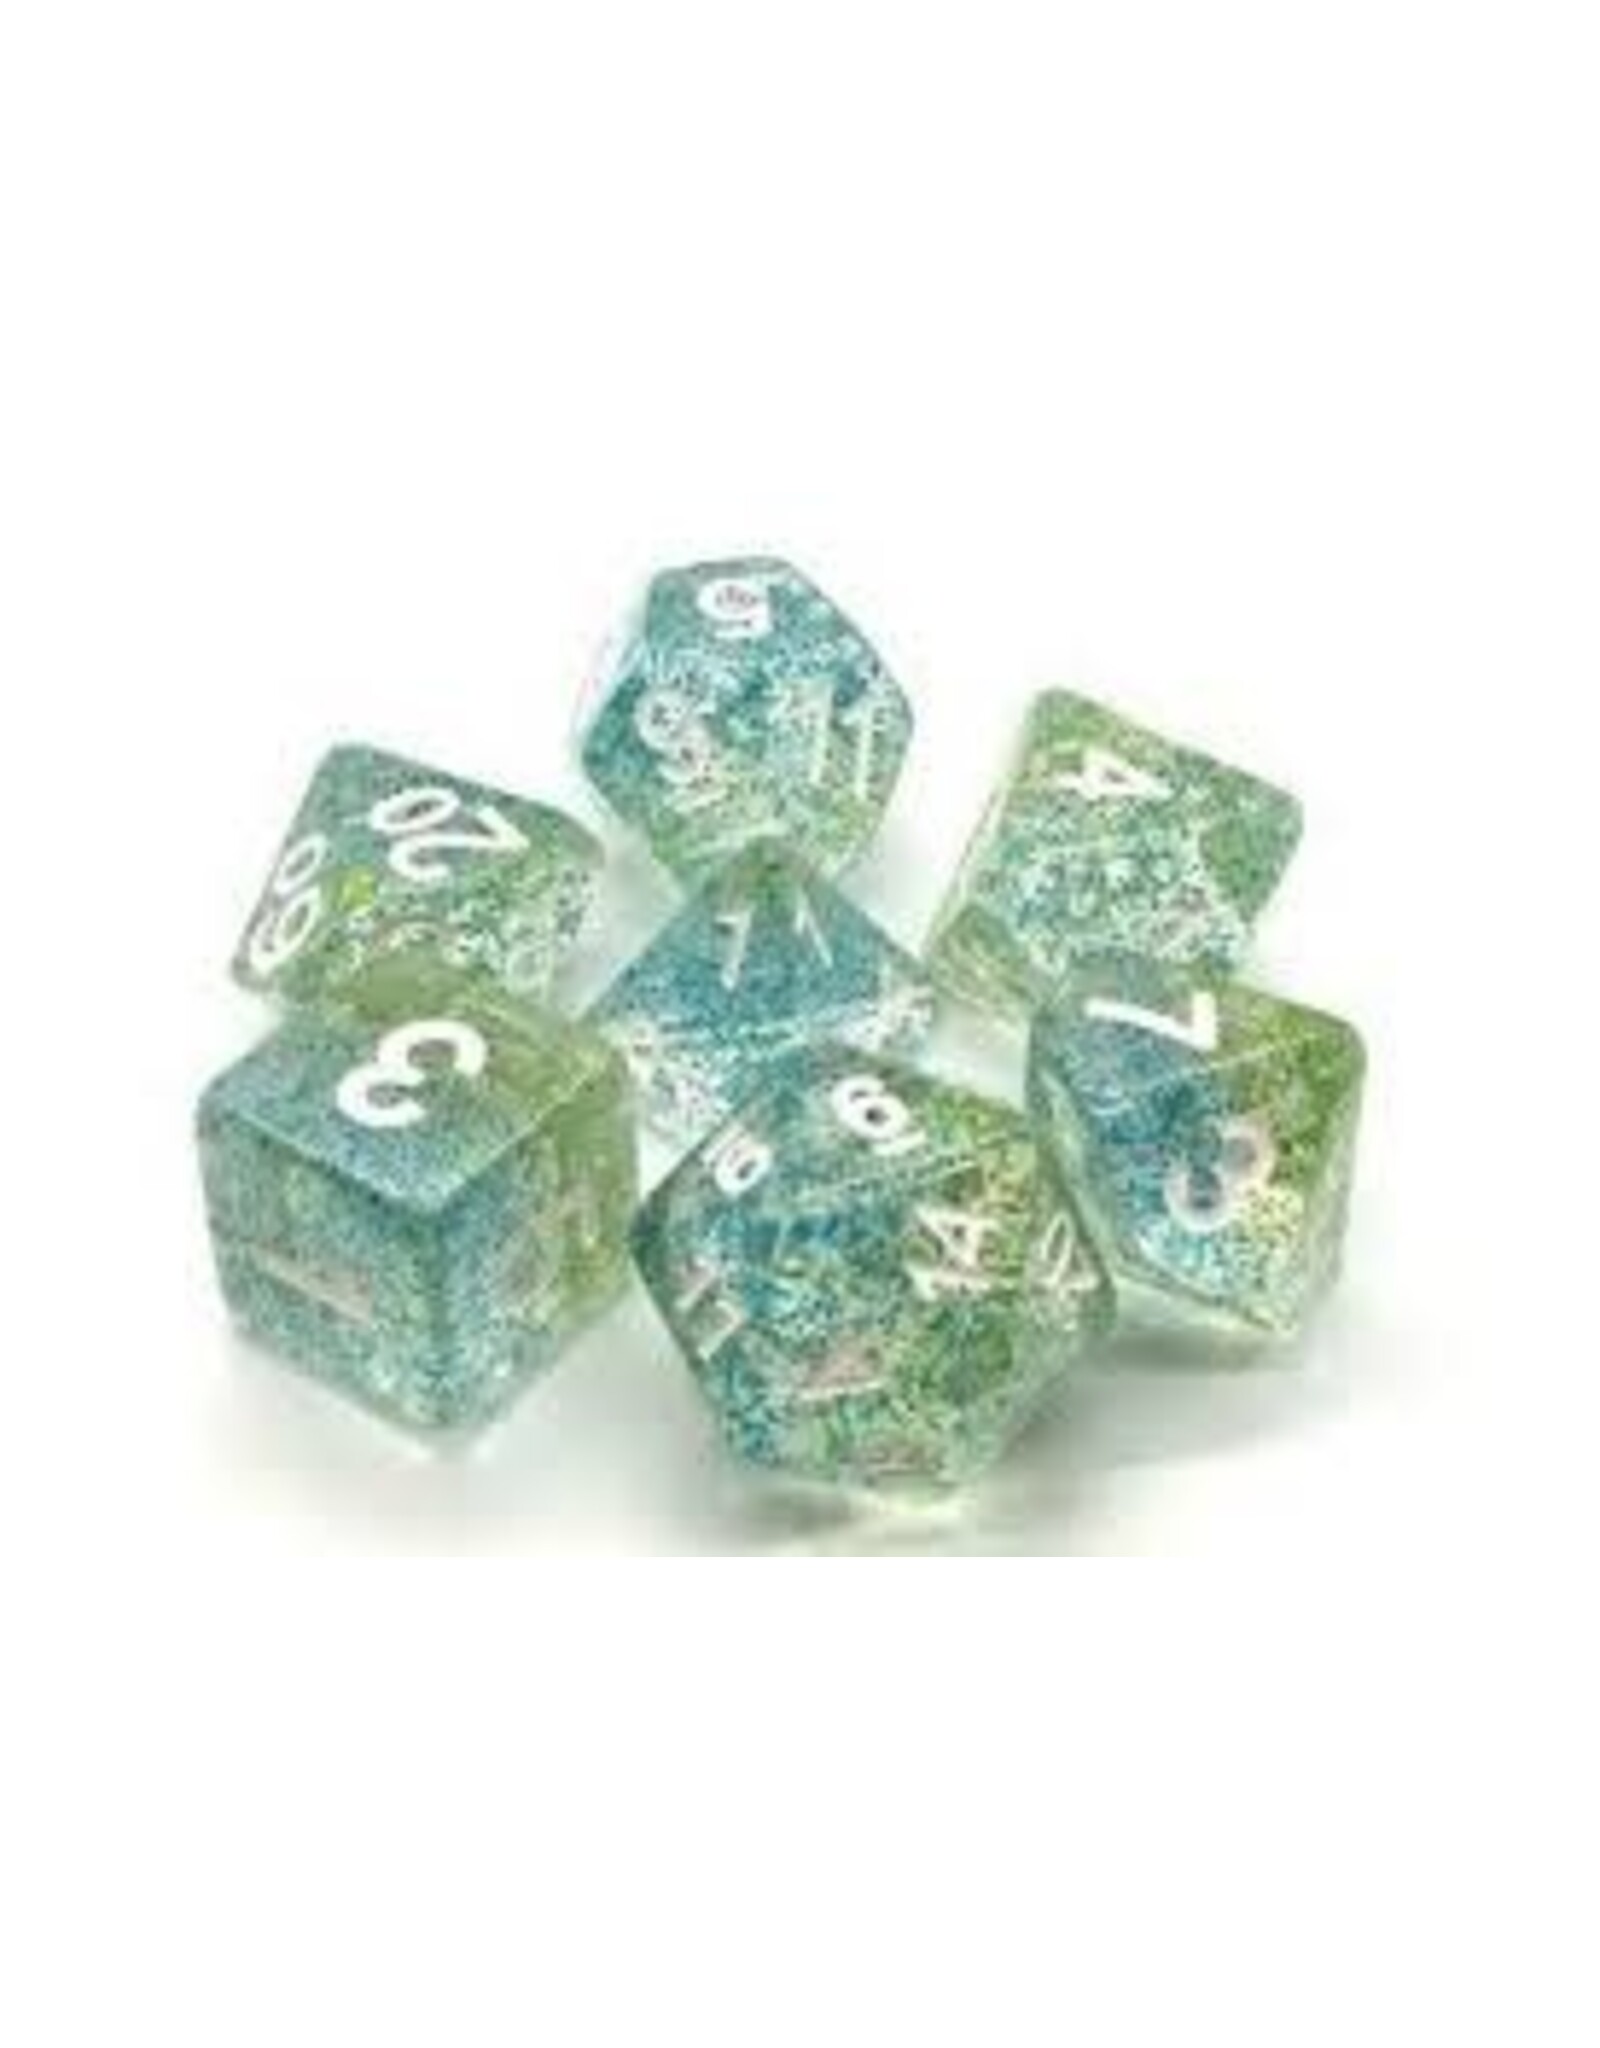 Old School 7 Piece Dnd RPG Dice Set Particles - Coral Reef